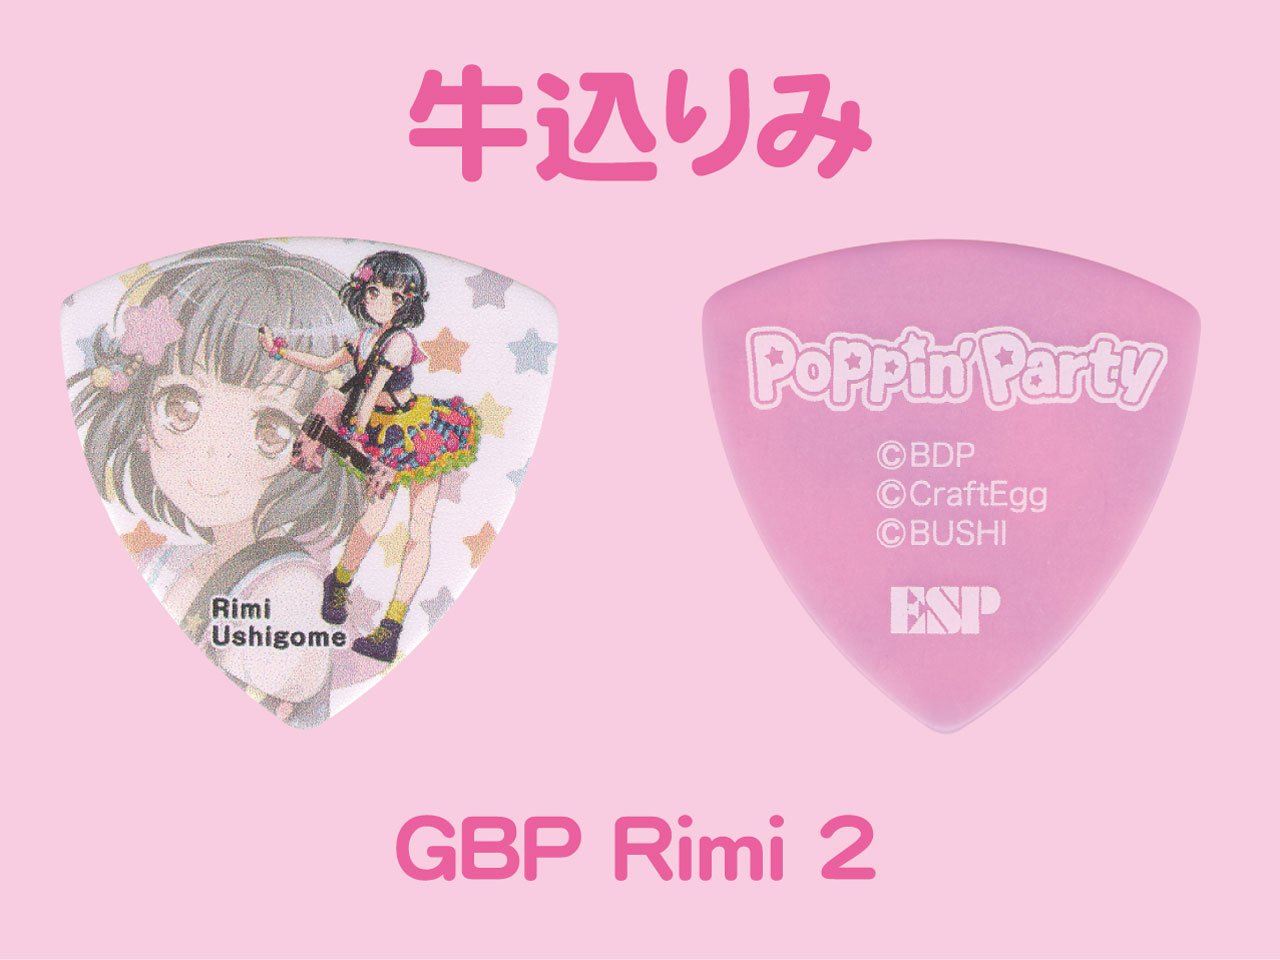 【ESP×BanG Dream!コラボピック】Poppin' Party Character Pick "牛込りみ"10枚セット（GBP Rimi 2）